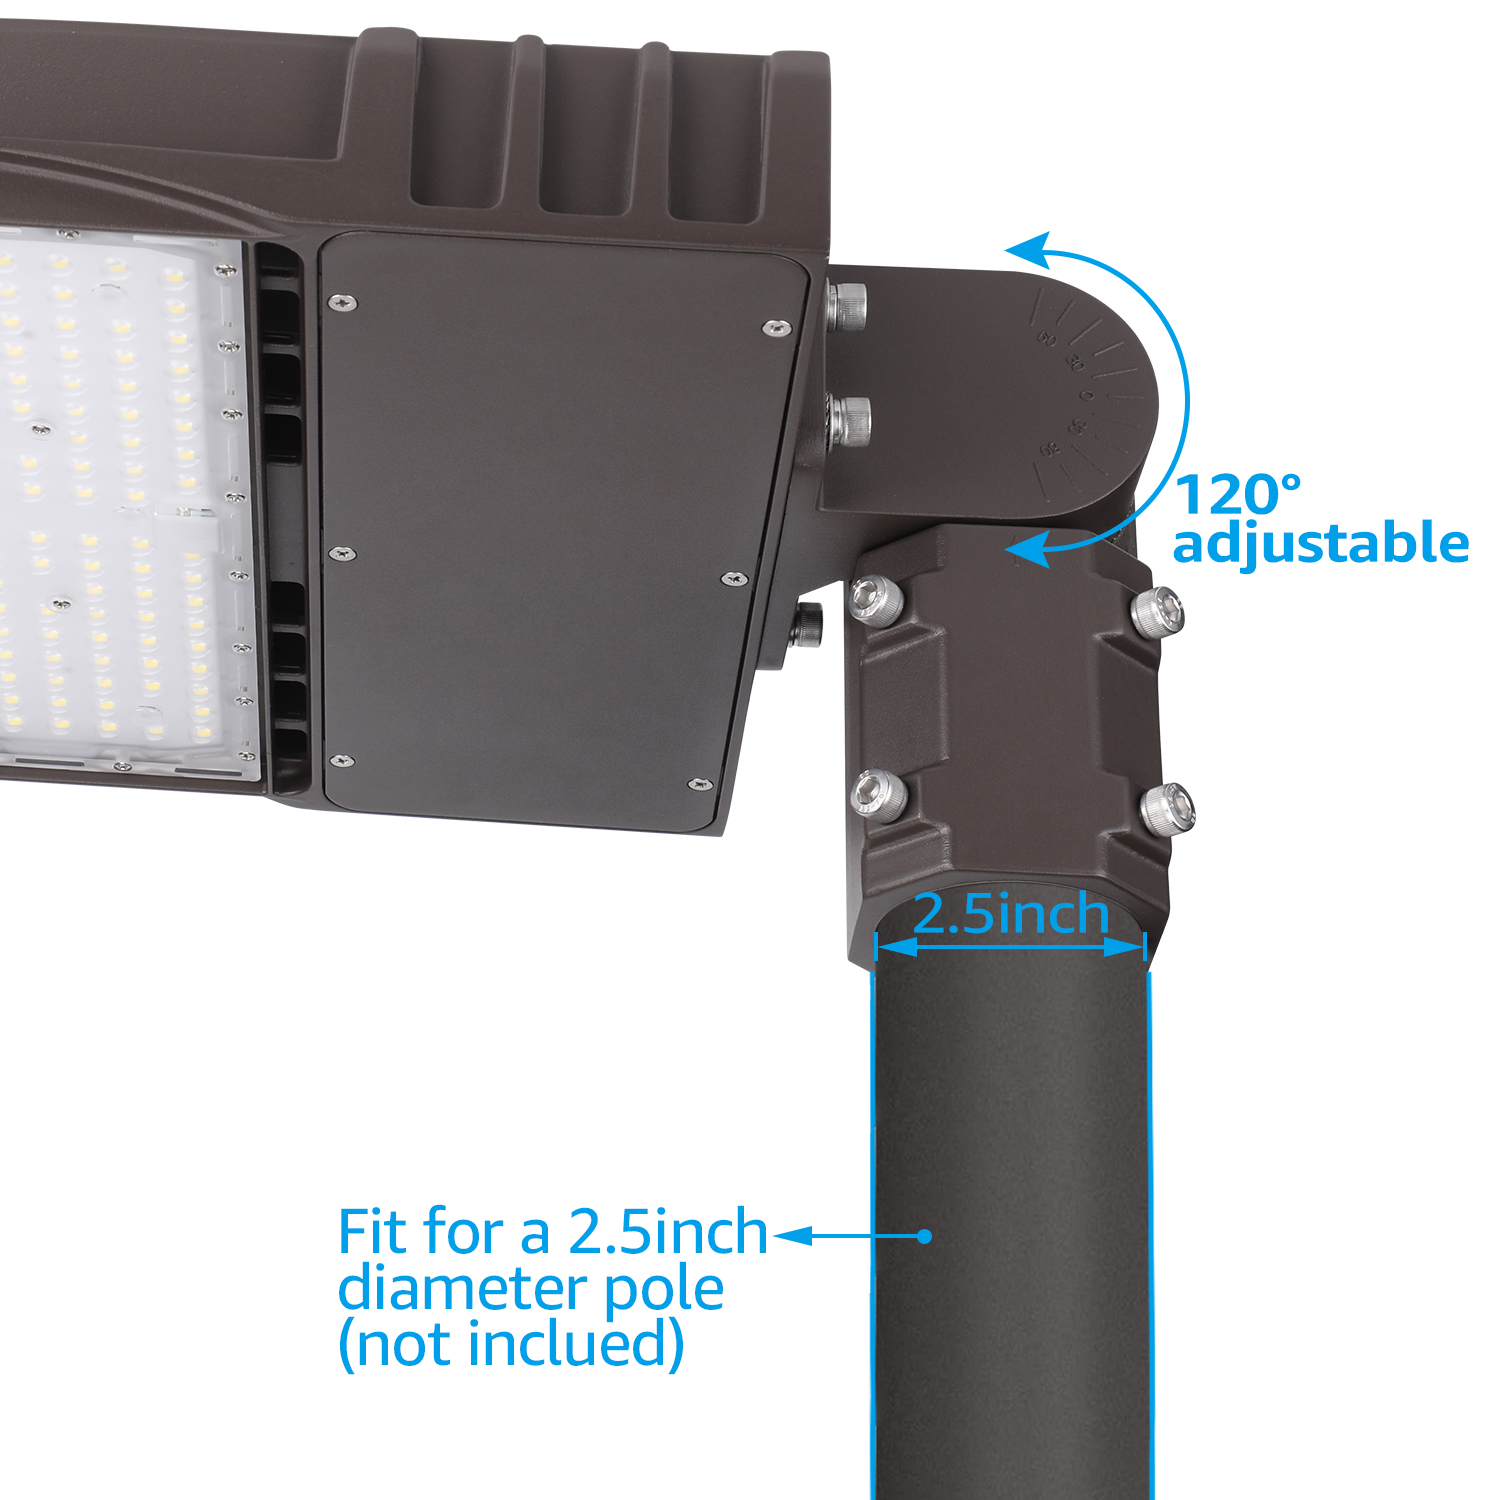 LEONLITE 150W LED Parking Lot Light, UL Listed Dusk to Dawn Area Light with Photocell, IP65 Waterproof Slipfitter Mount Shoebox, 5000K Daylight for Driveway, Street, Playground, Shorting Cap Included - image 3 of 7